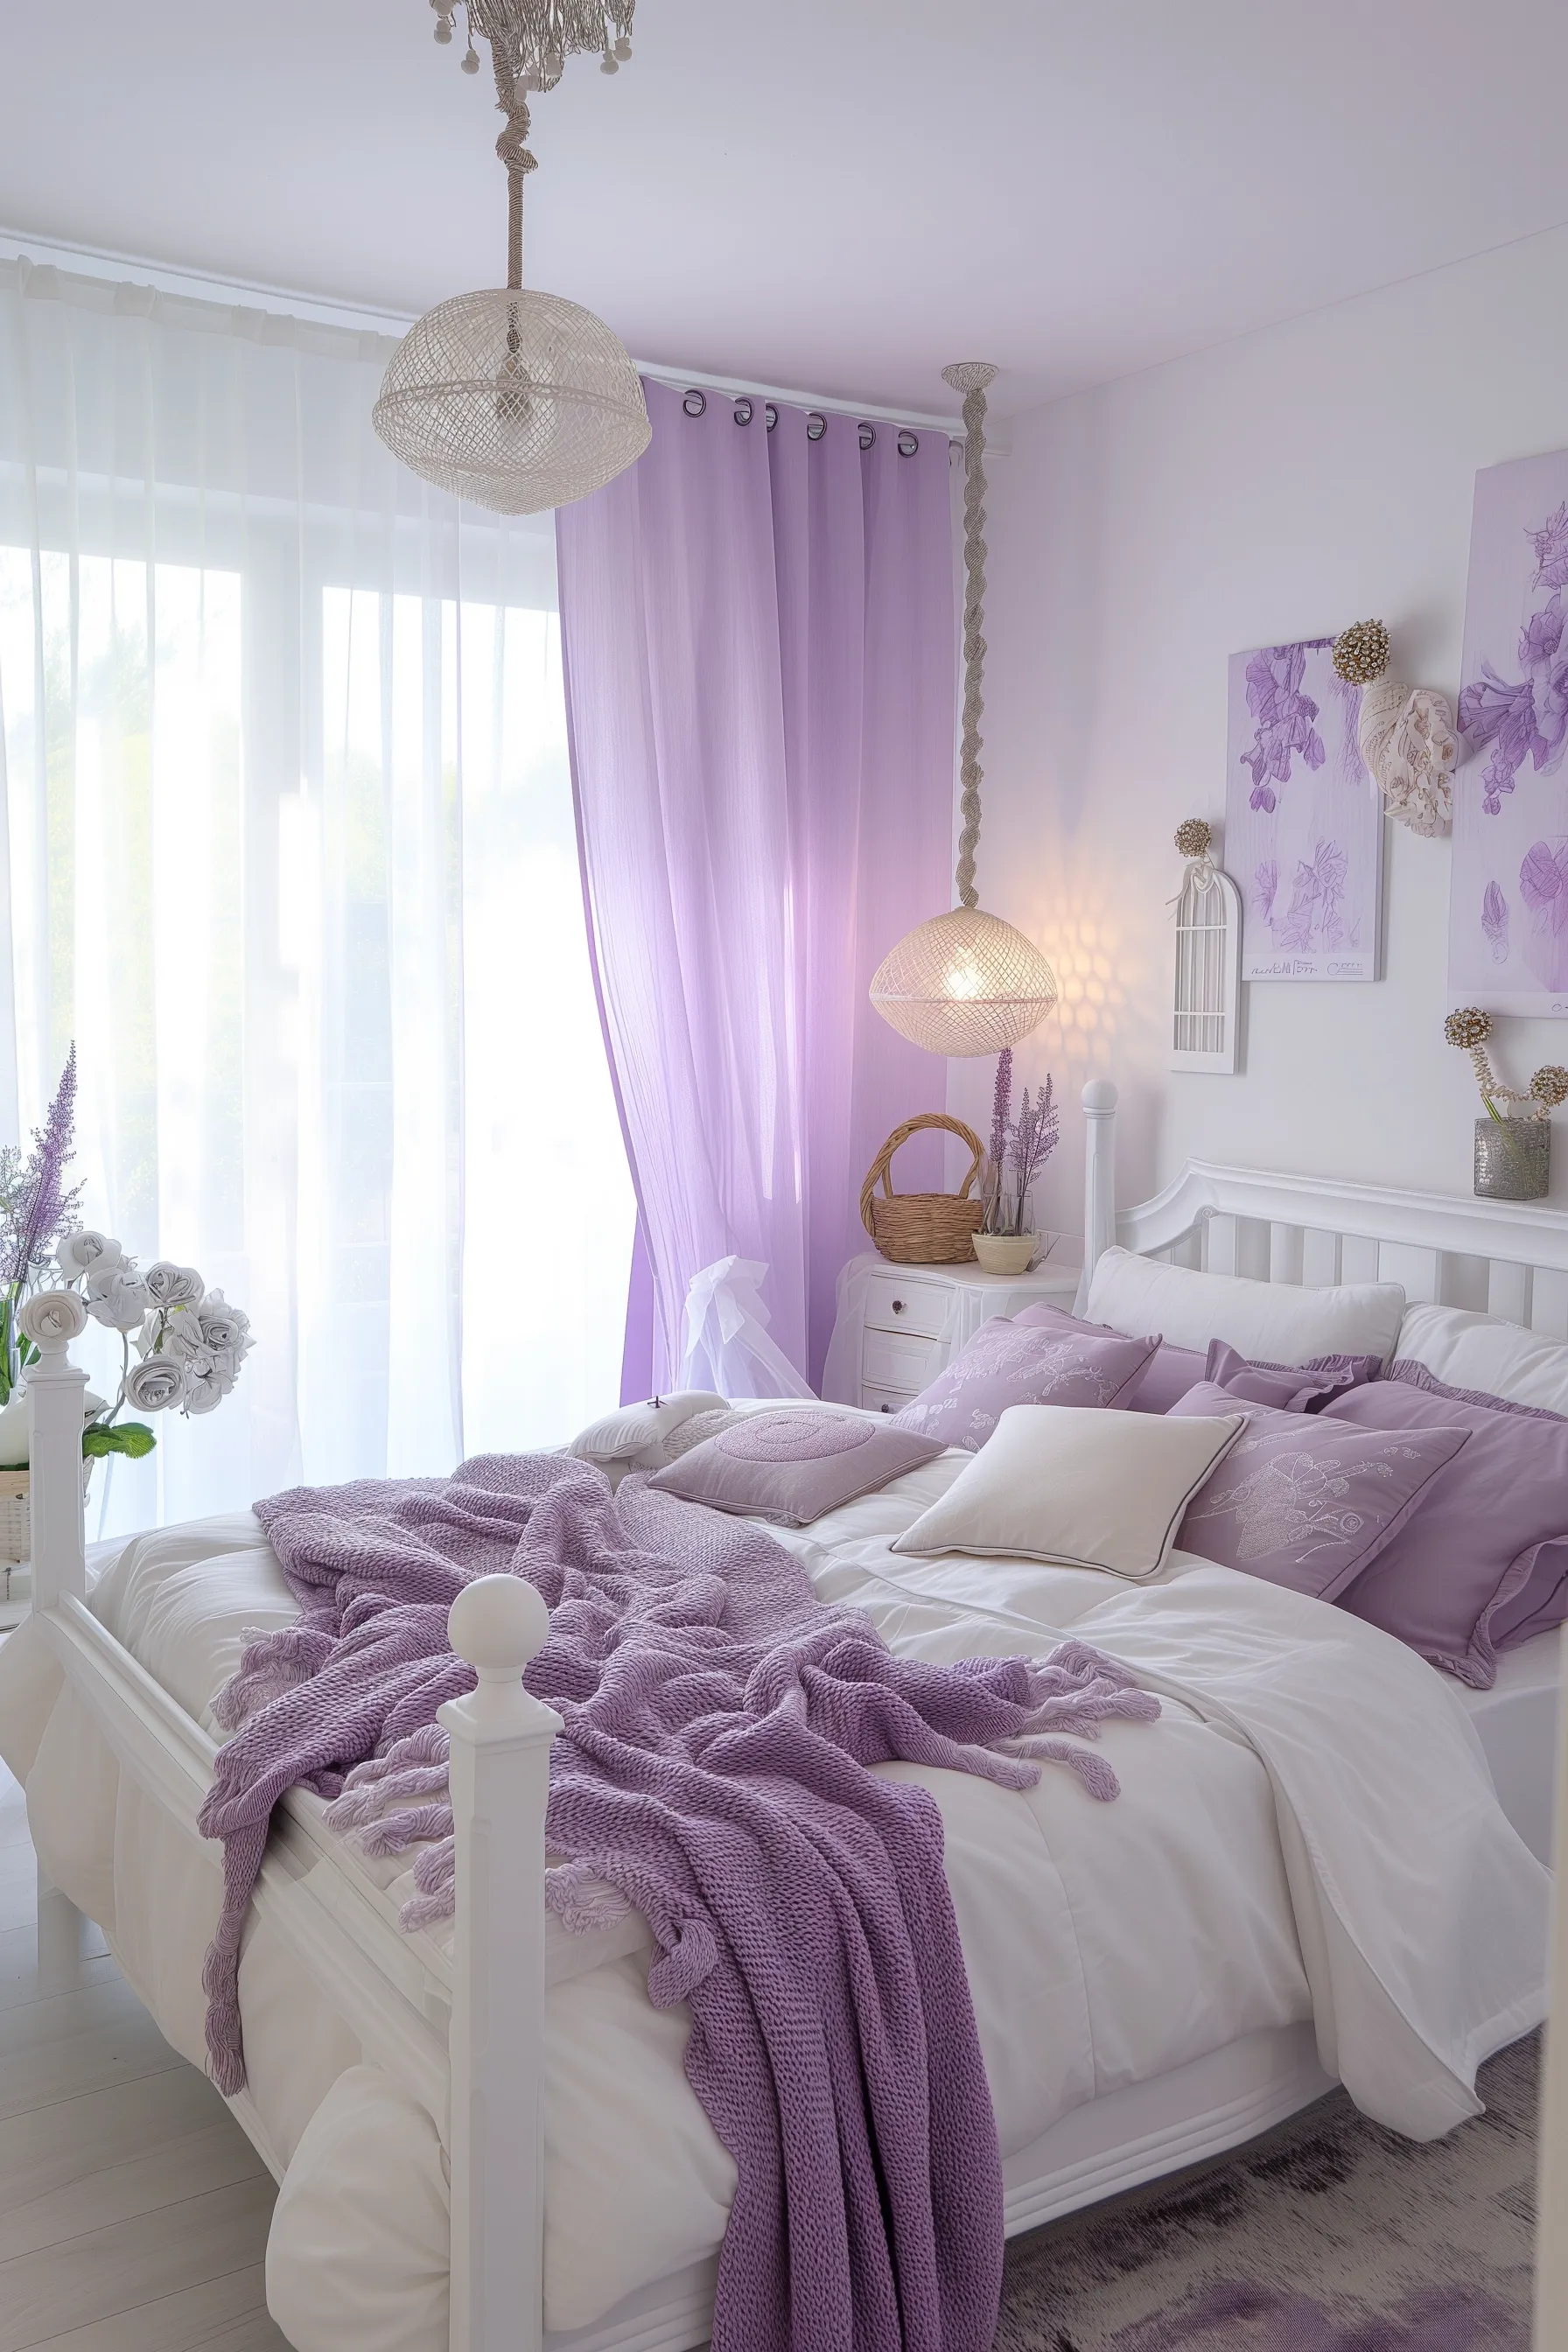 A white and purple bedroom with purple throw pillows